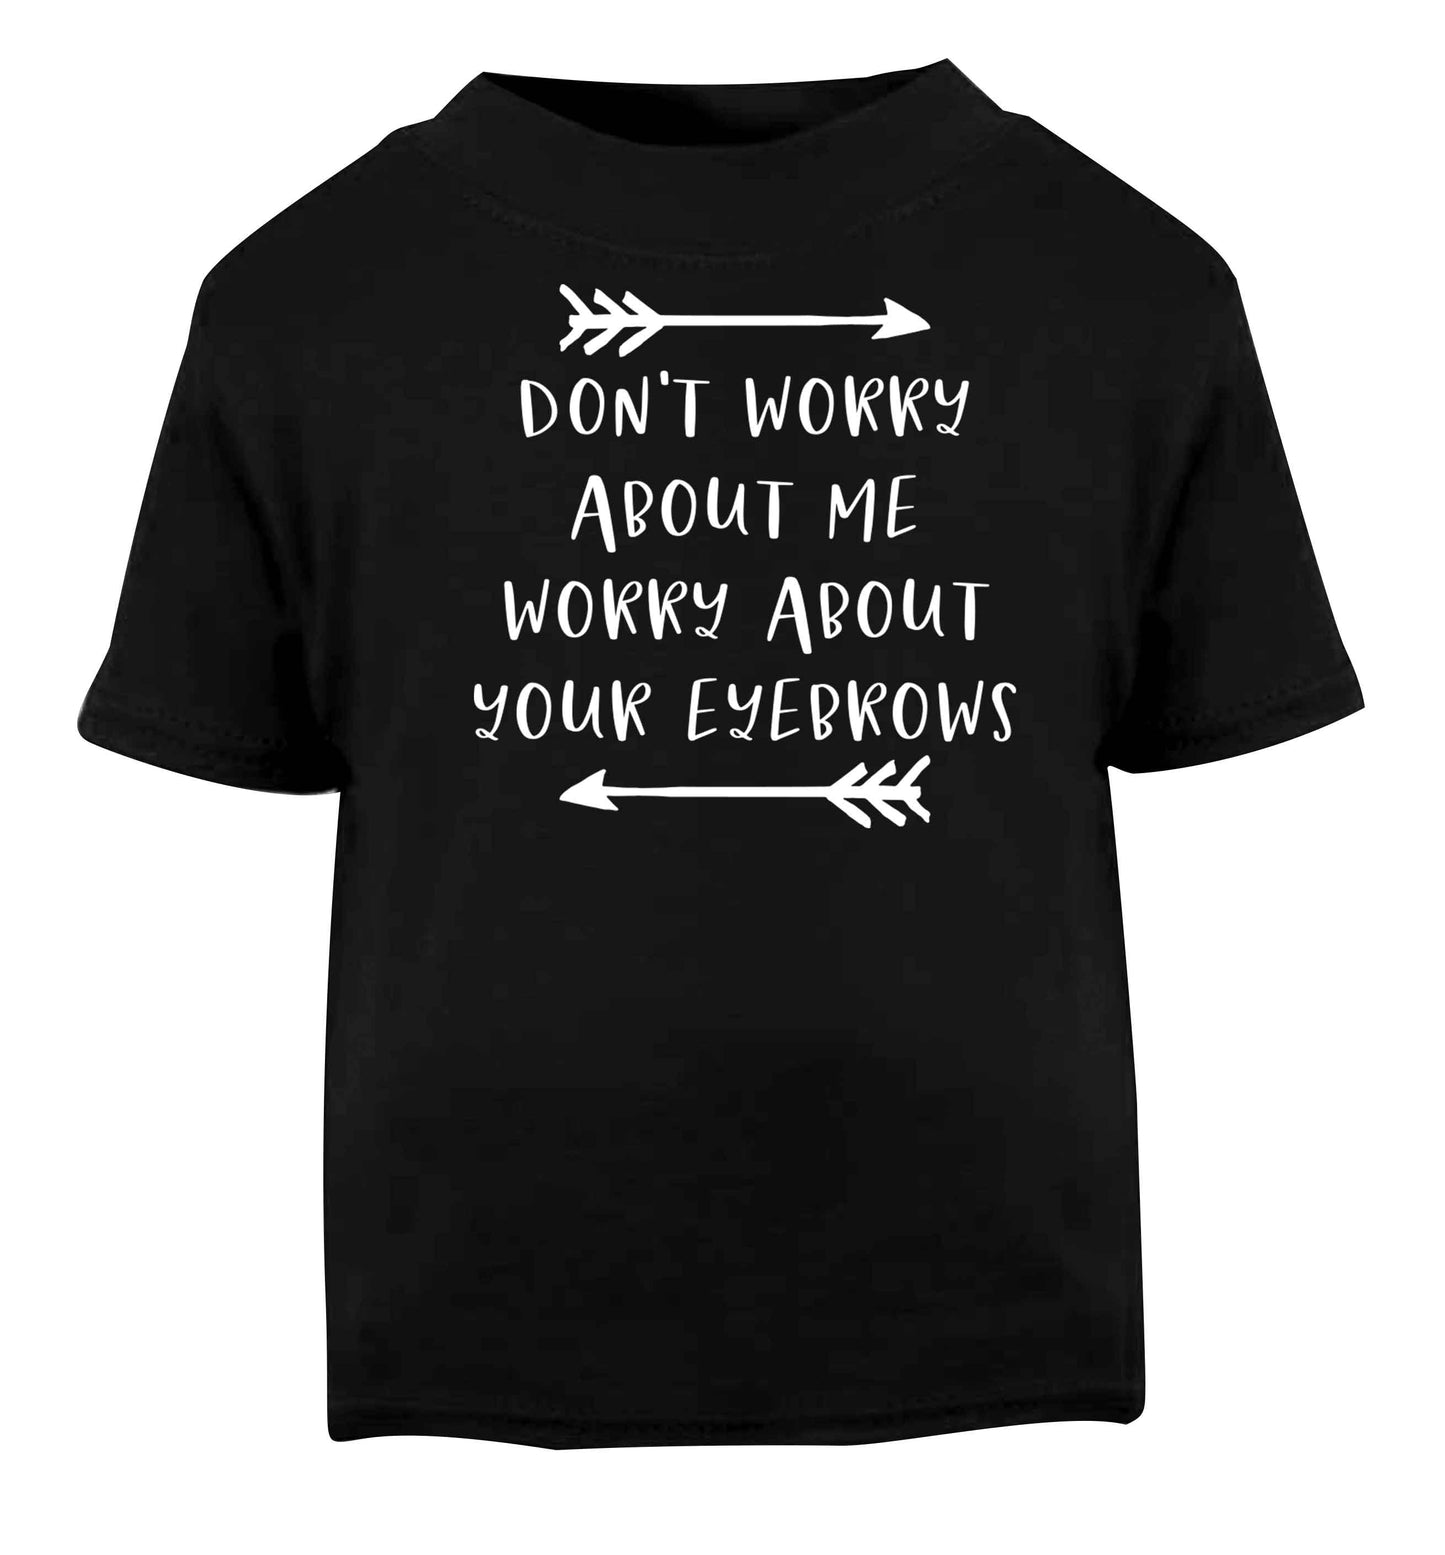 Don't worry about me worry about your eyebrows Black baby toddler Tshirt 2 years